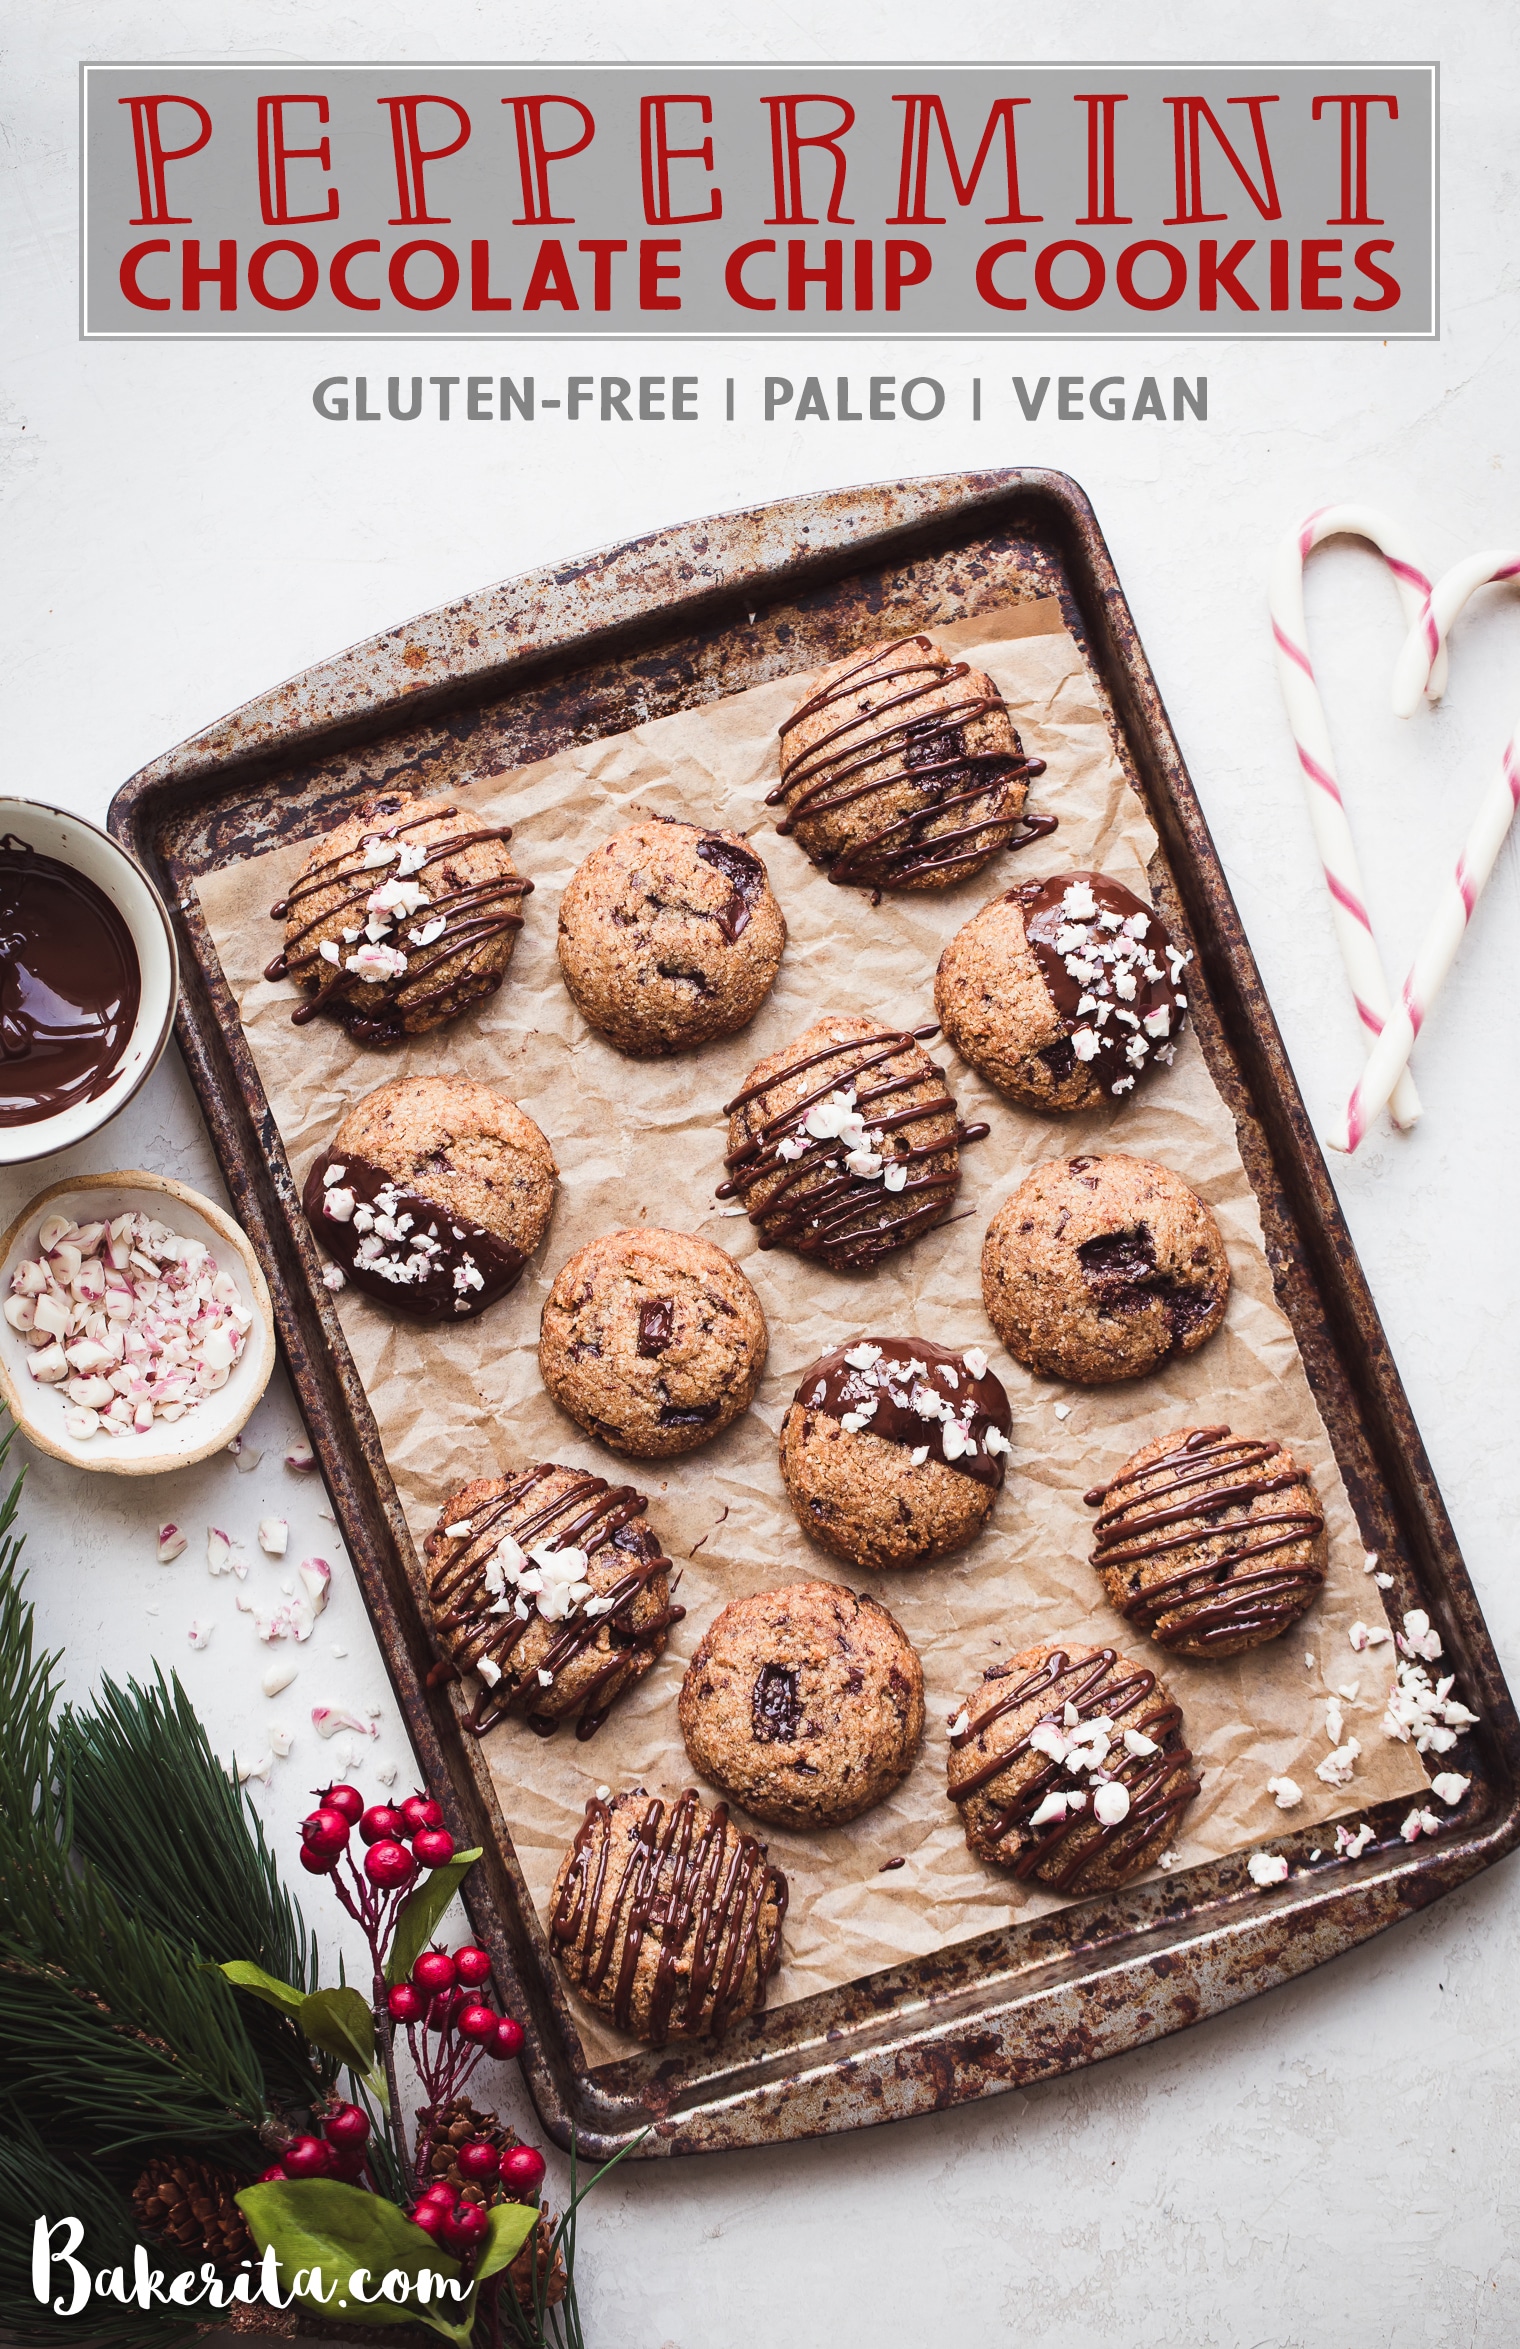 These Gluten-Free Vegan Peppermint Chocolate Chip Cookies will make your cookie dreams come true! They make perfect Christmas cookies and taste so scrumptious, especially with the extra chocolate drizzle.